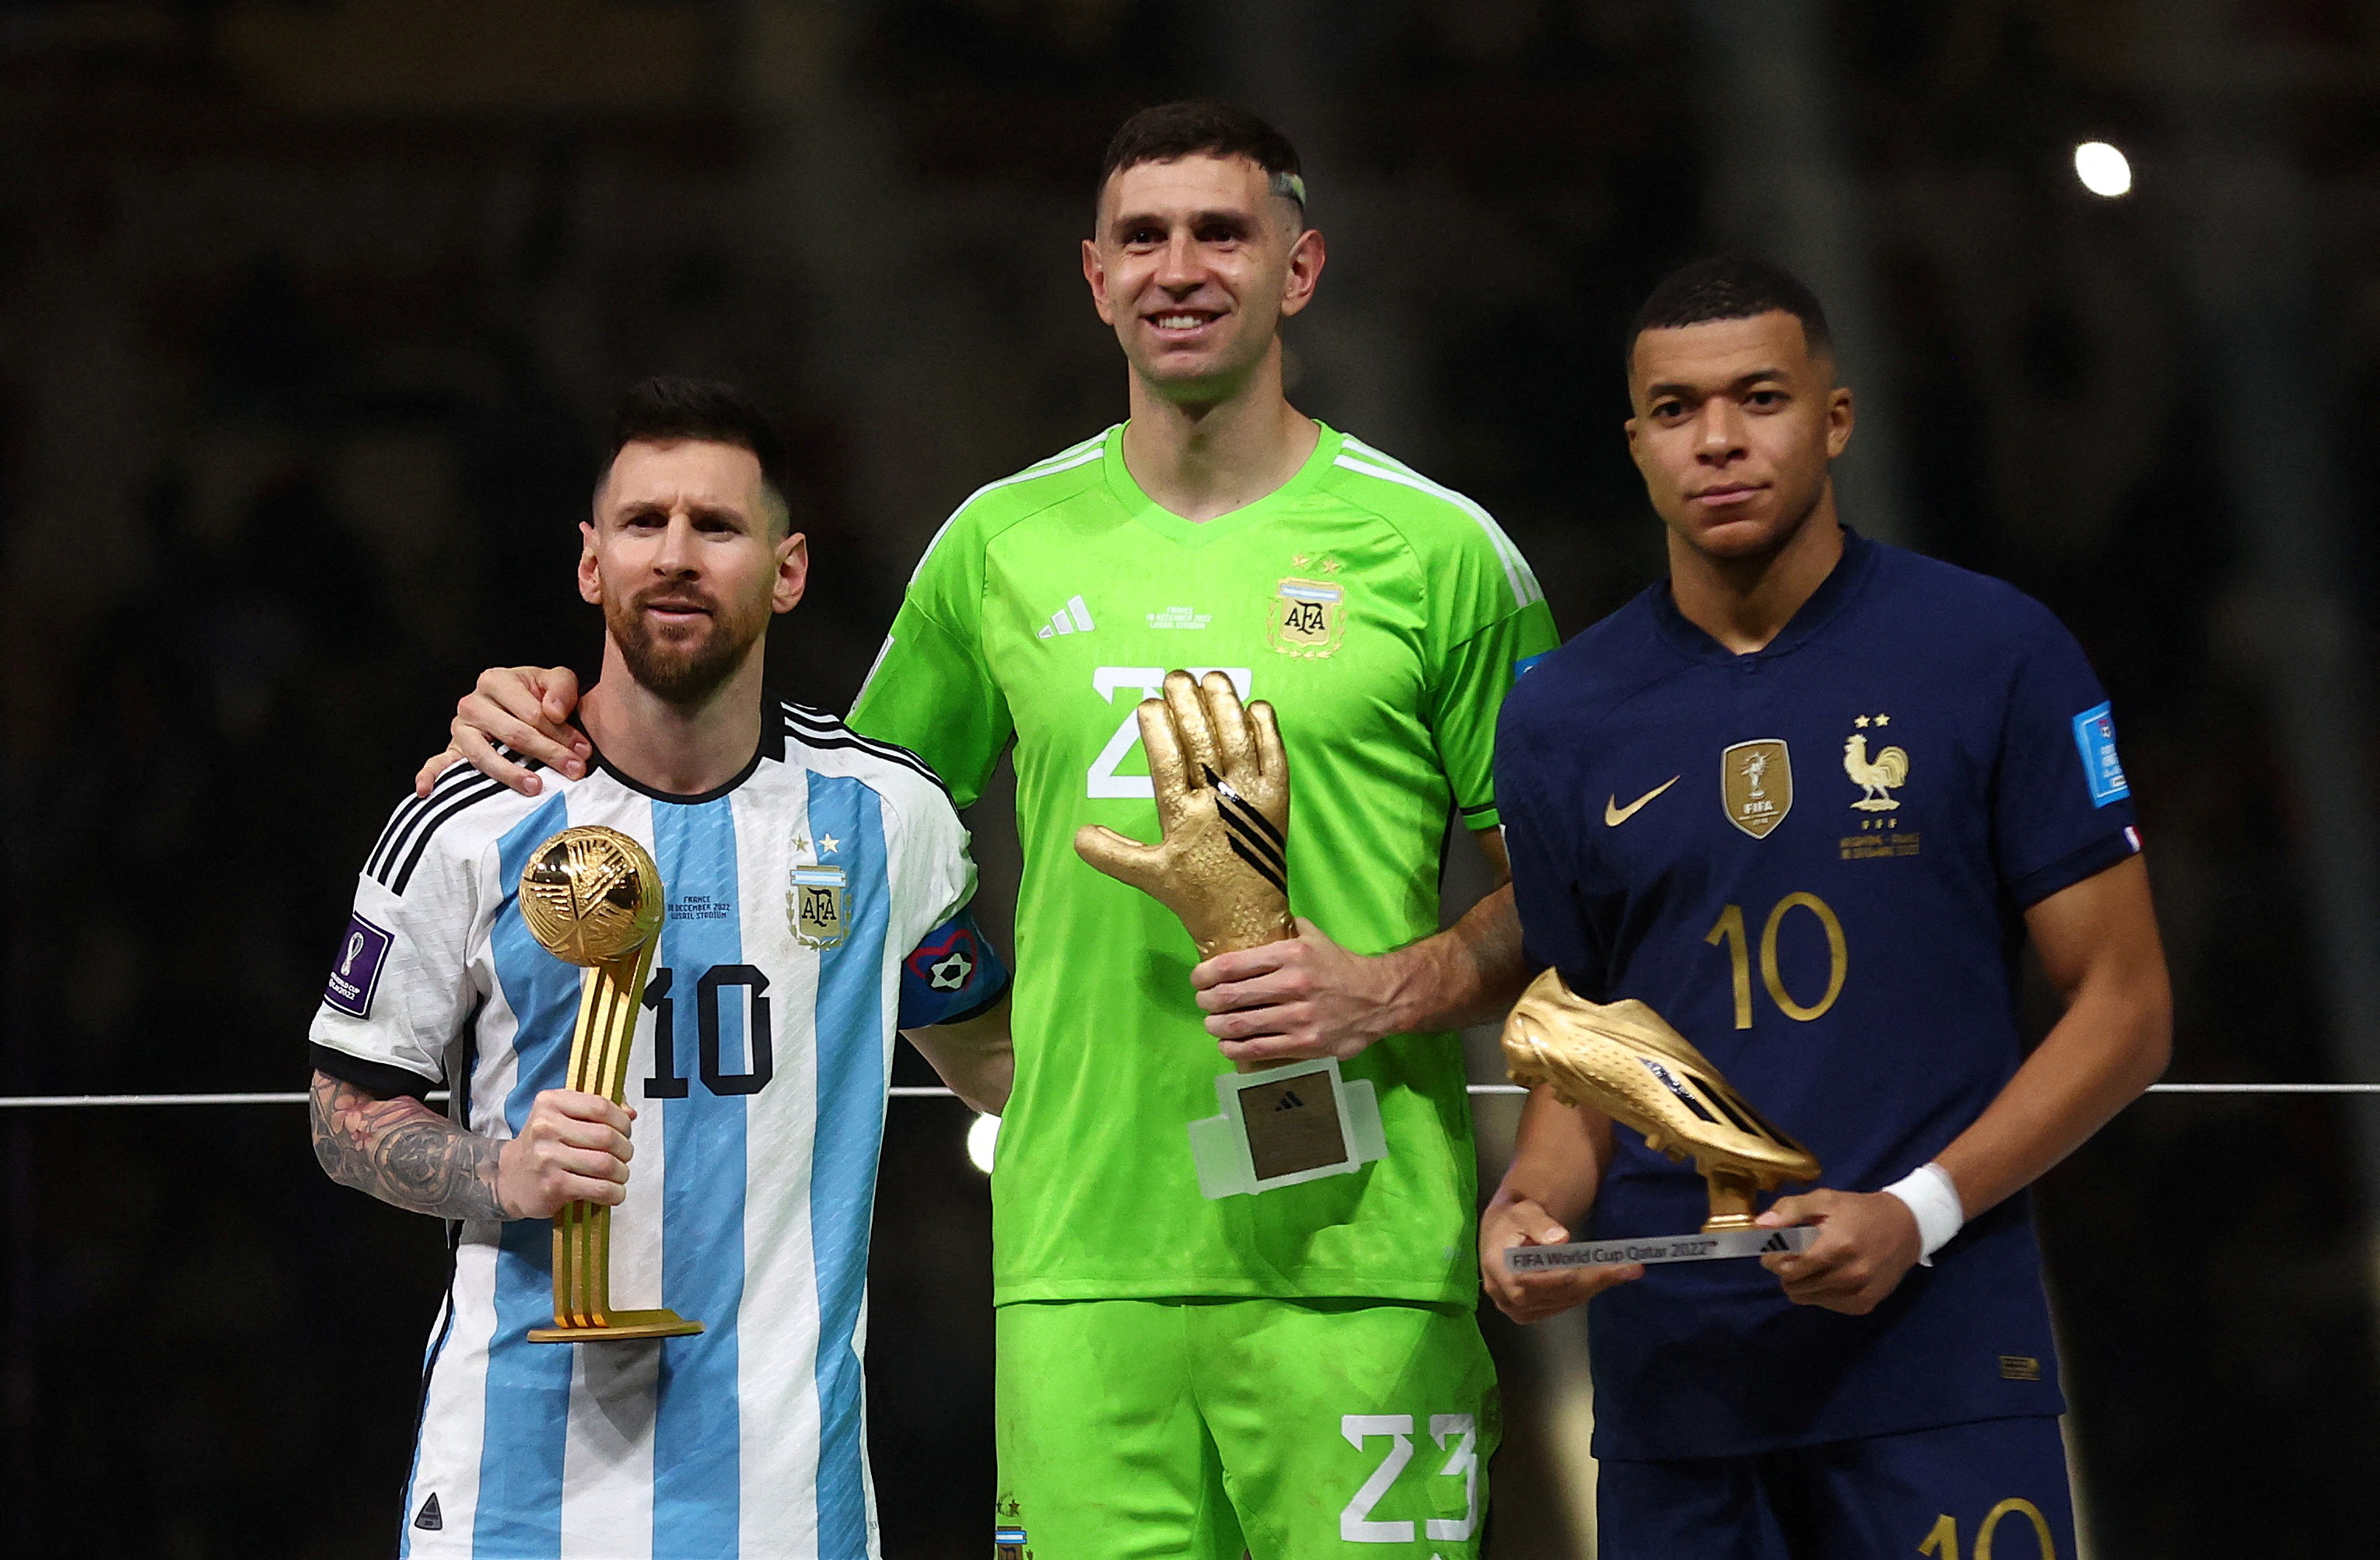 FILE PHOTO: Soccer Football - FIFA World Cup Qatar 2022 - Final - Argentina v France - Lusail Stadium, Lusail, Qatar - December 18, 2022 Golden Ball winner Argentina's Lionel Messi, Golden Glove winner Argentina's Emiliano Martinez and Golden Boot winner France's Kylian Mbappe pose with the trophies REUTERS/Carl Recine/File Photo